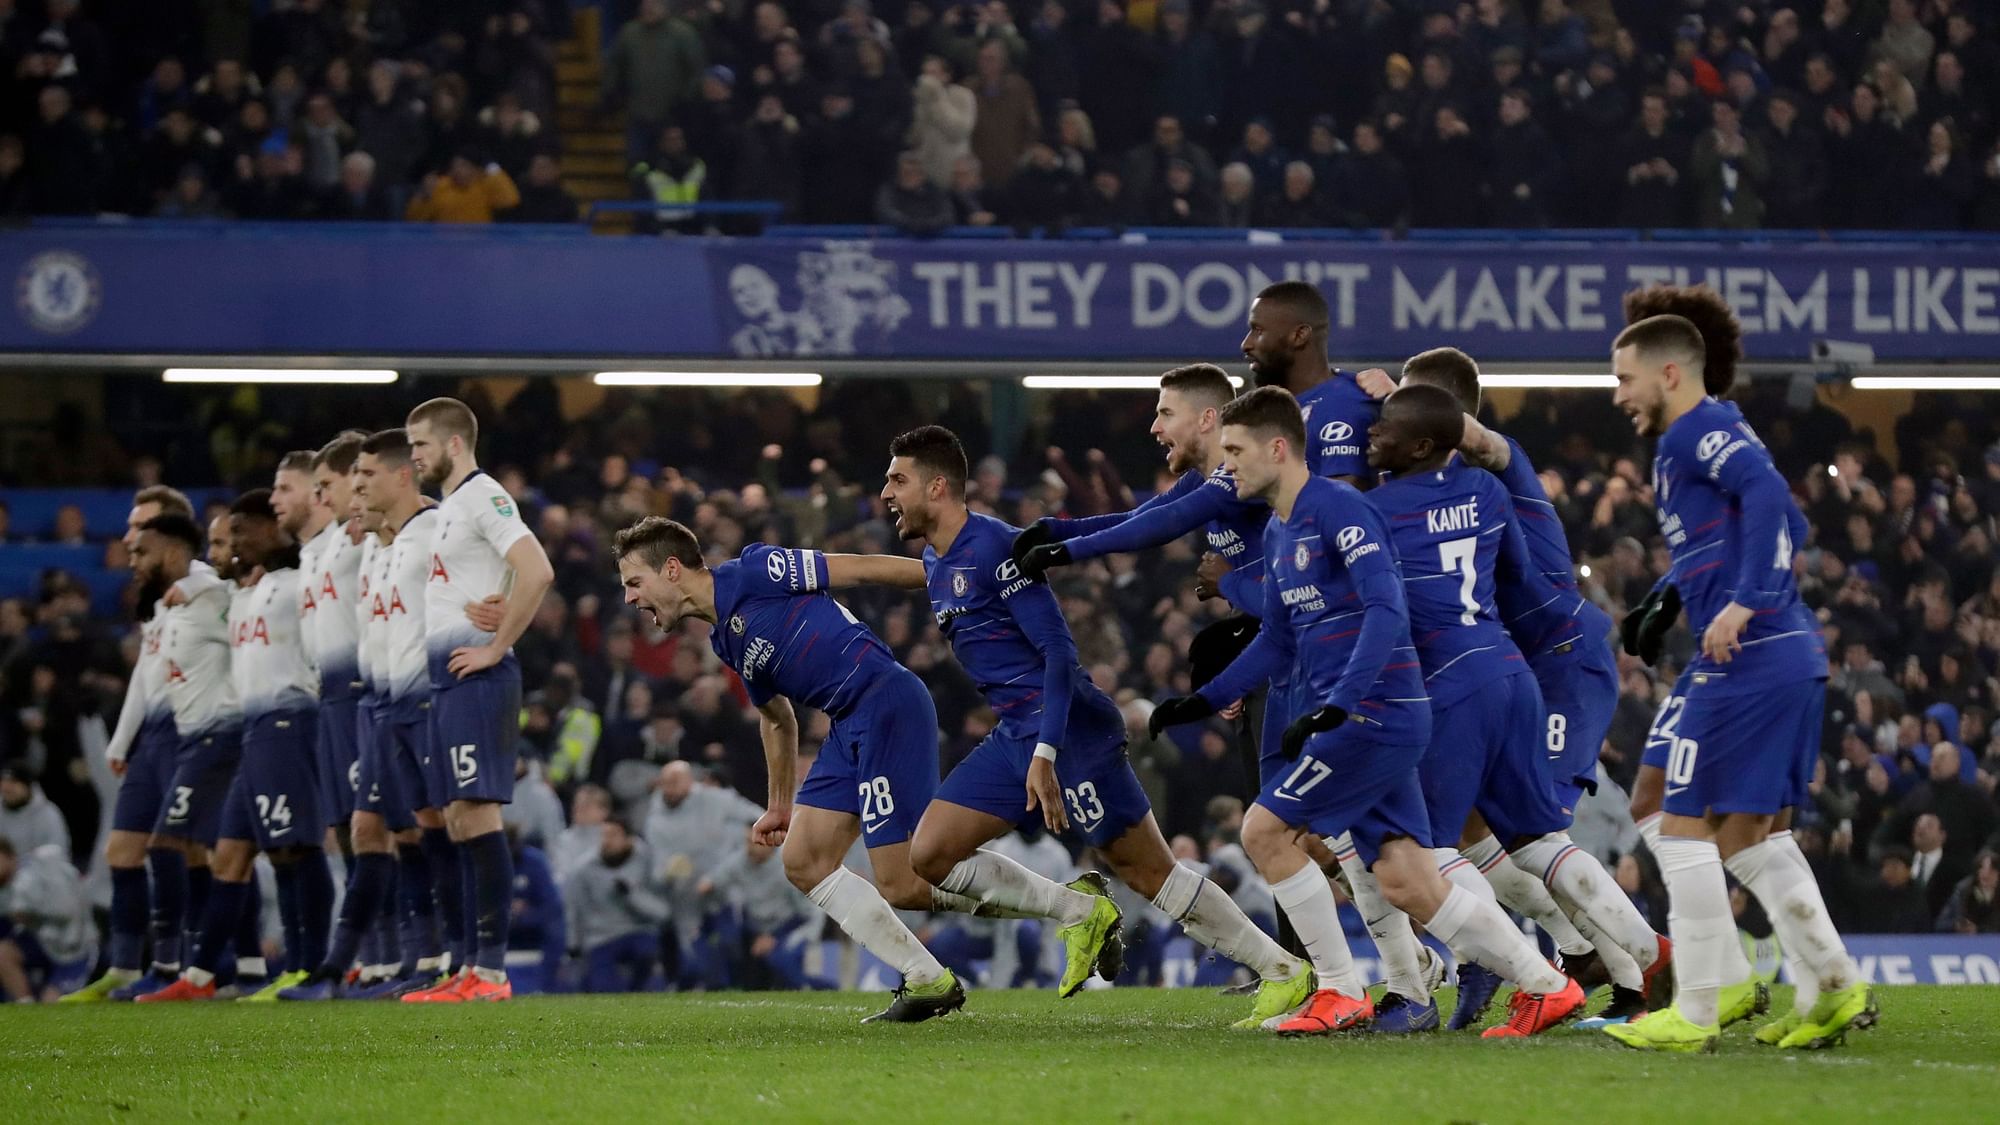 Chelsea beat Tottenham Hotspur on penalties to advance to the English League Cup finals, where they meet Manchester City.